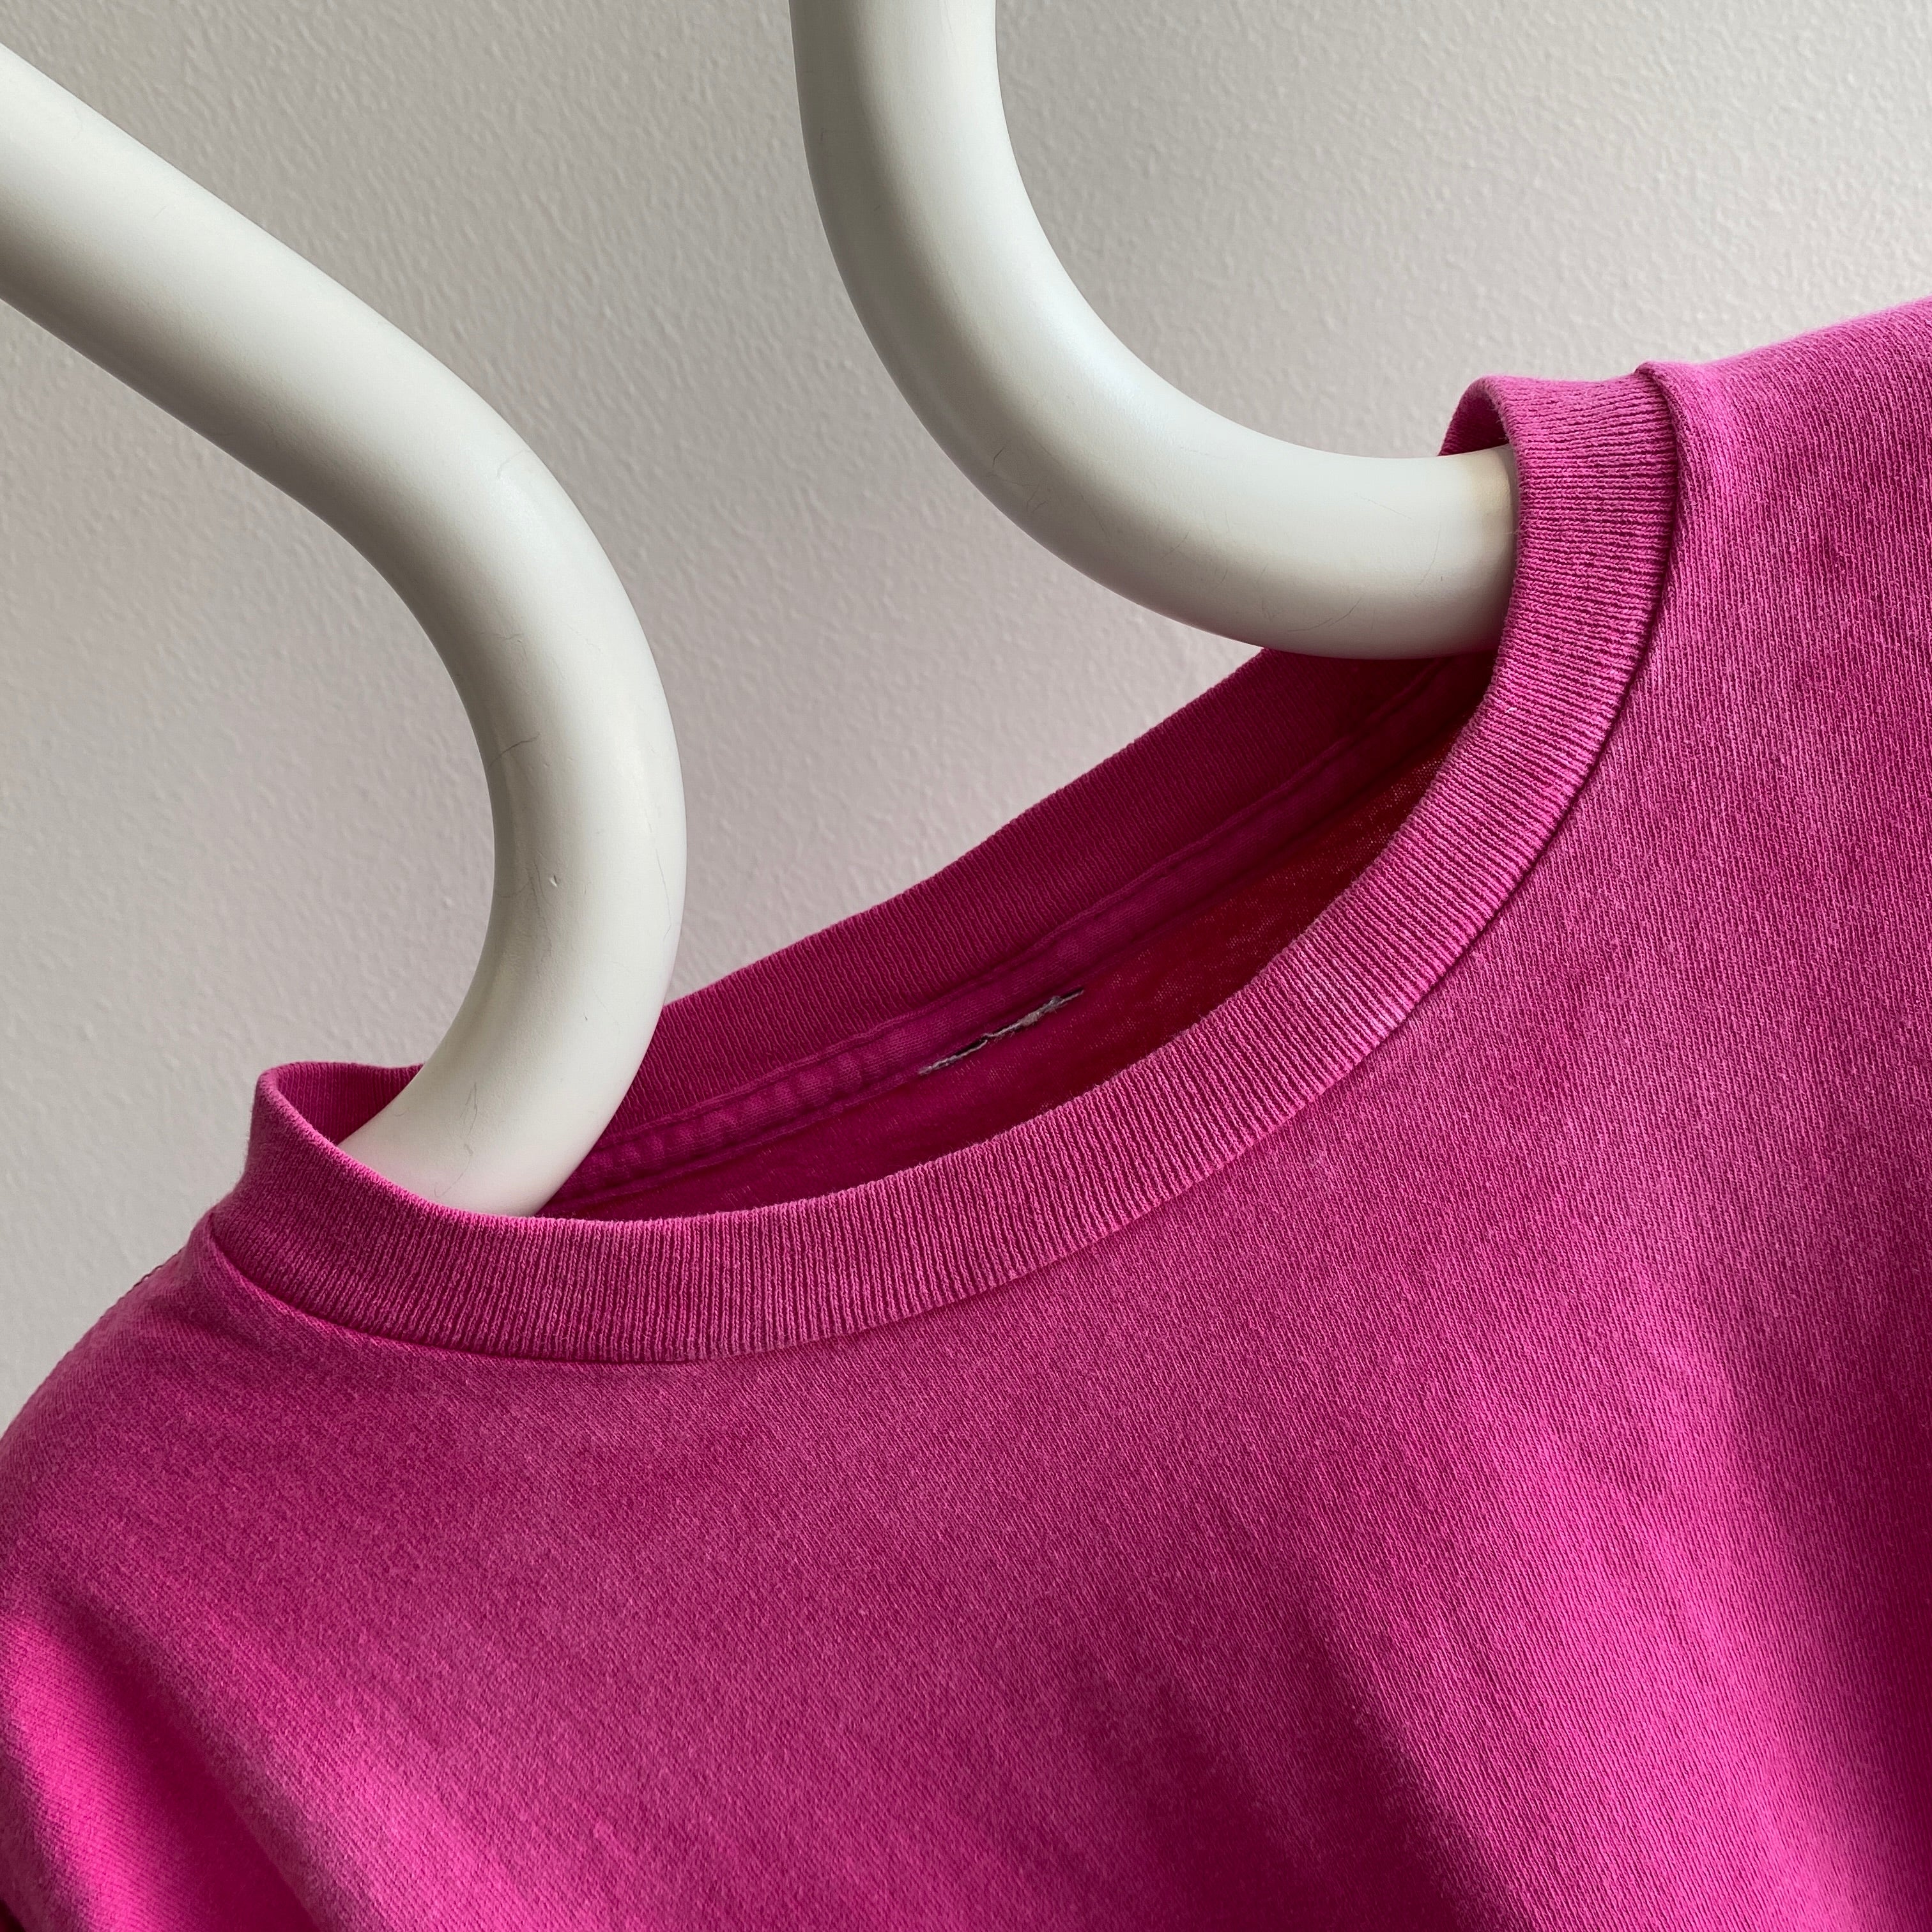 1990s Oversized Magenta Pink Pocket T-Shirt with Fade Marks